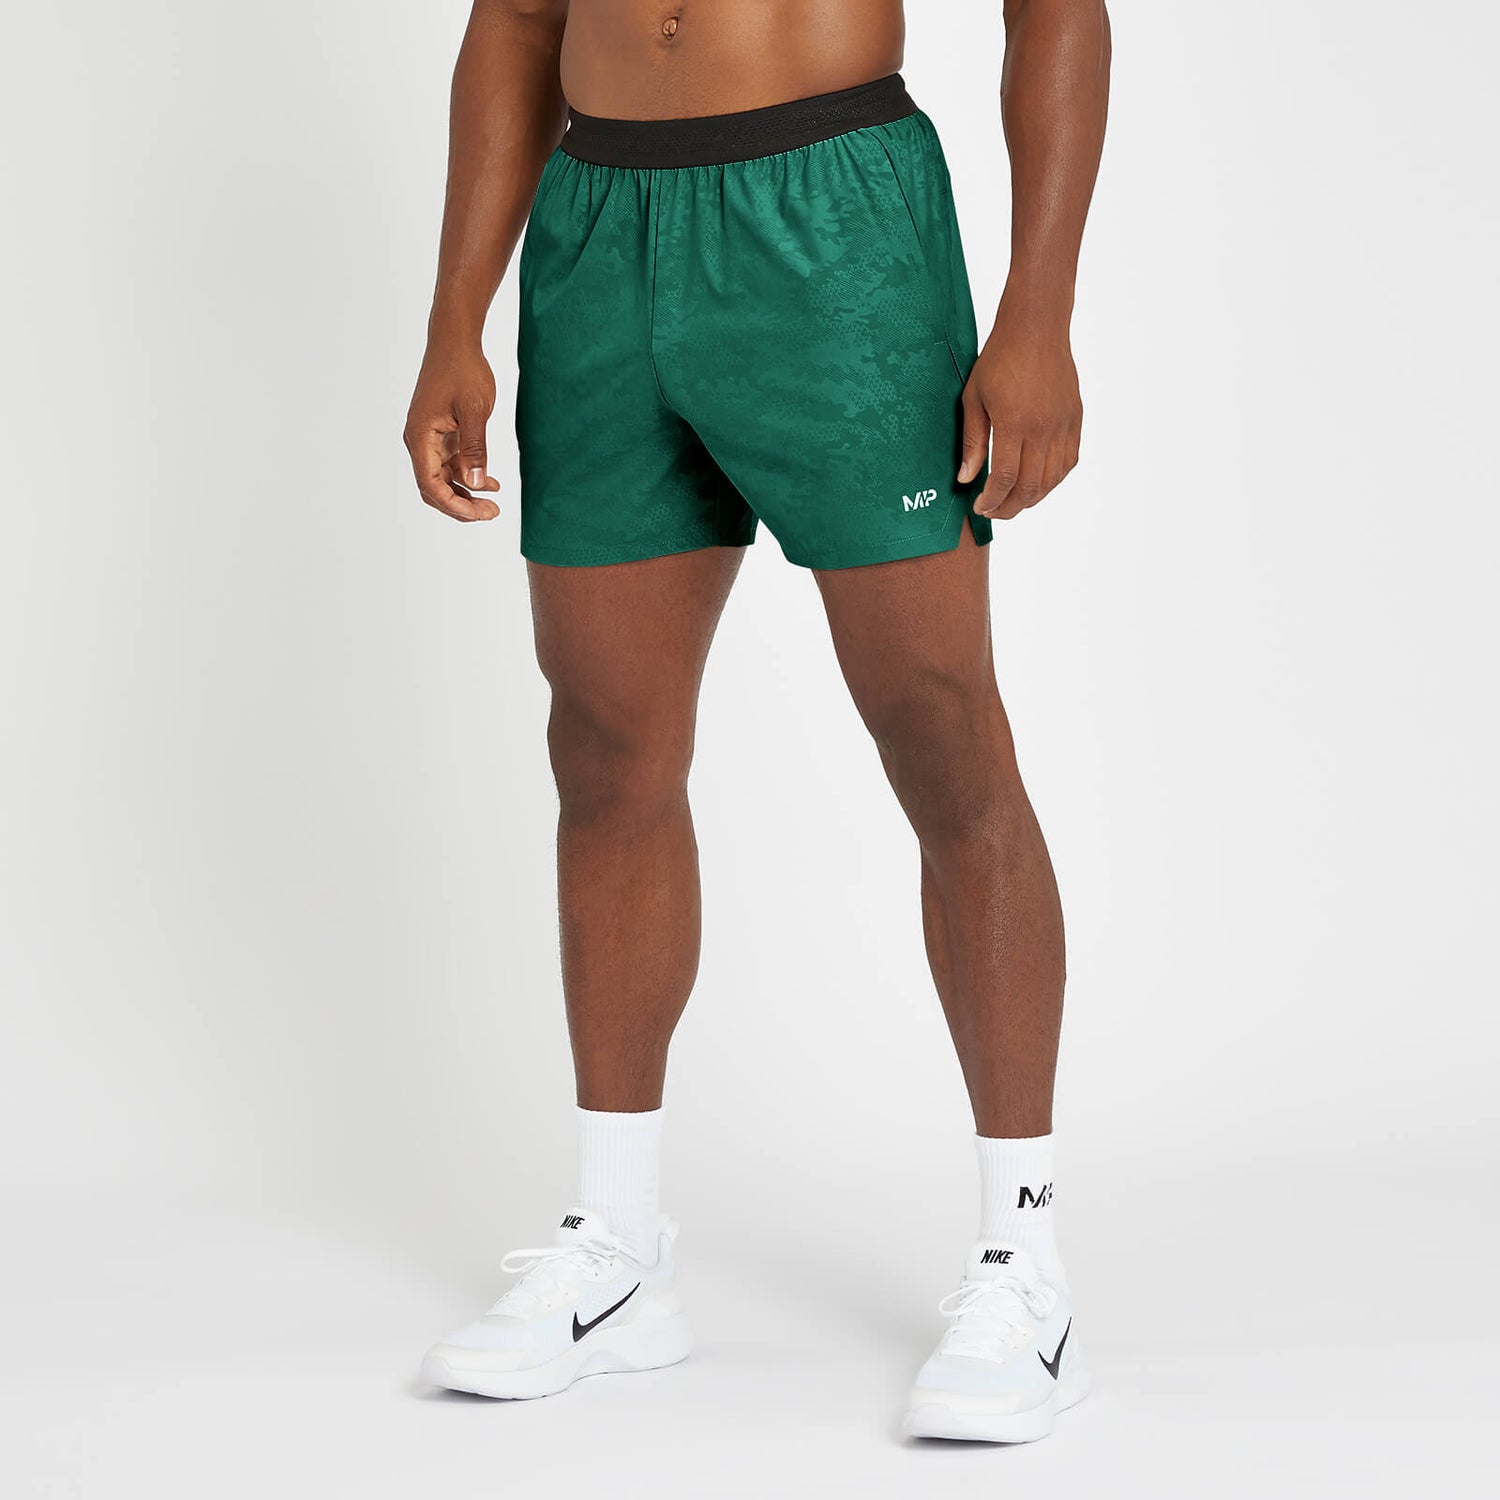 Limited Edition MP Men's Engage Shorts - Pine | MYPROTEIN™